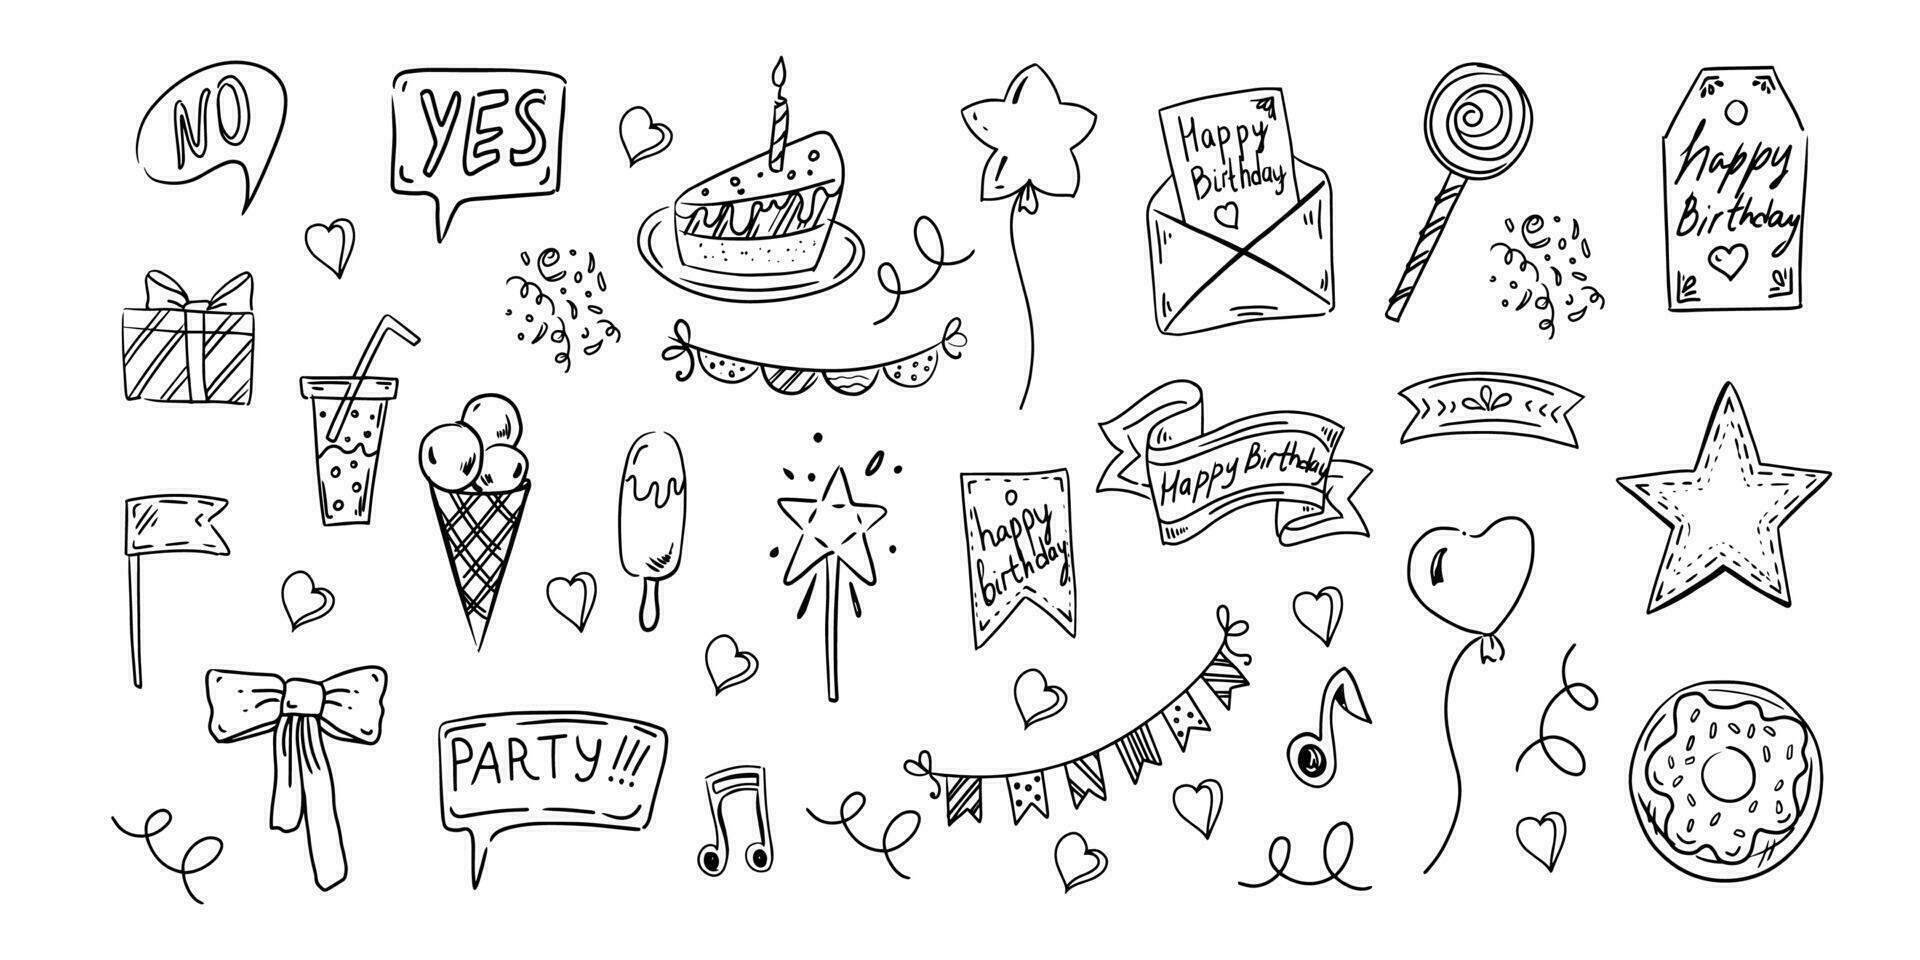 Birthday doodle set. Hand drawn vector Happy Birthday sketches on white background. Envelope, cake, balloon, ice cream, flags, hearts, labels, ribbons, bow, gift, star.